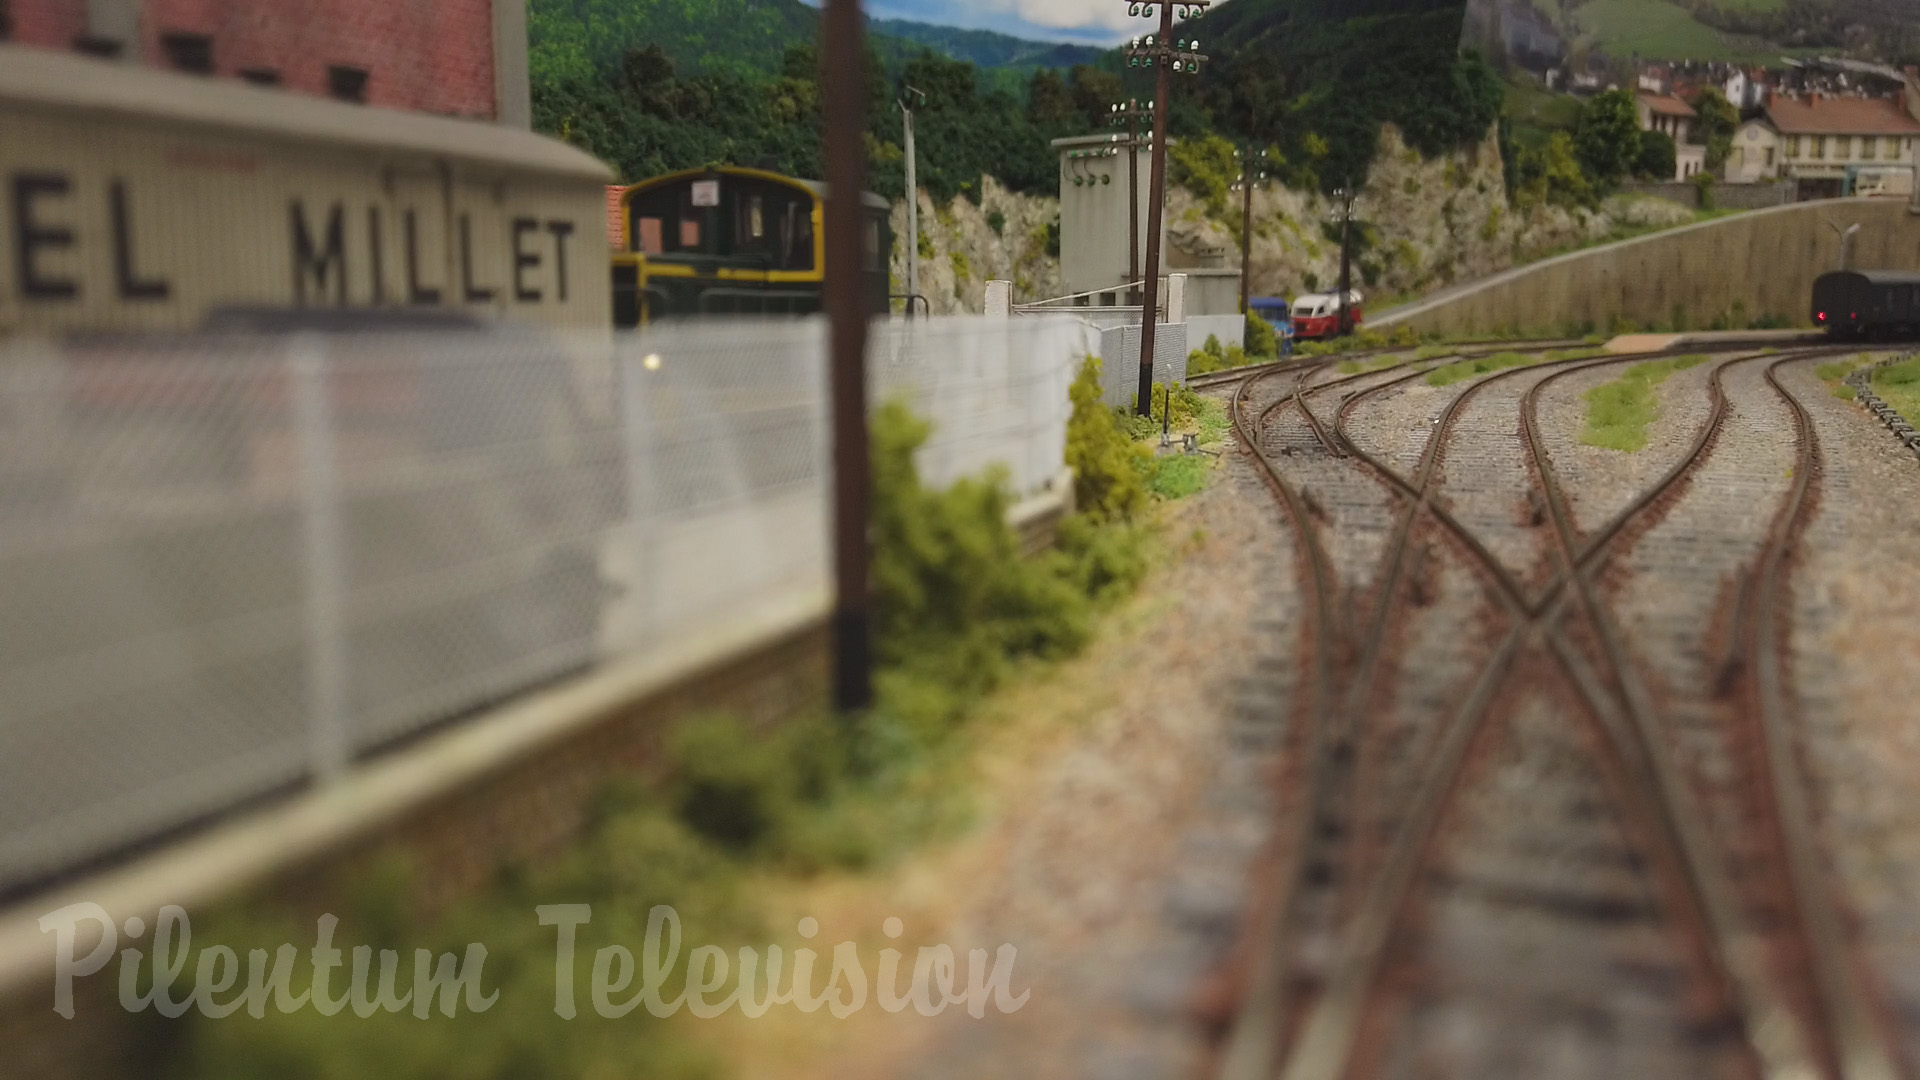 One of the most beautiful and largest model railways in France - Renaud Yver 's HO scale MRR layout